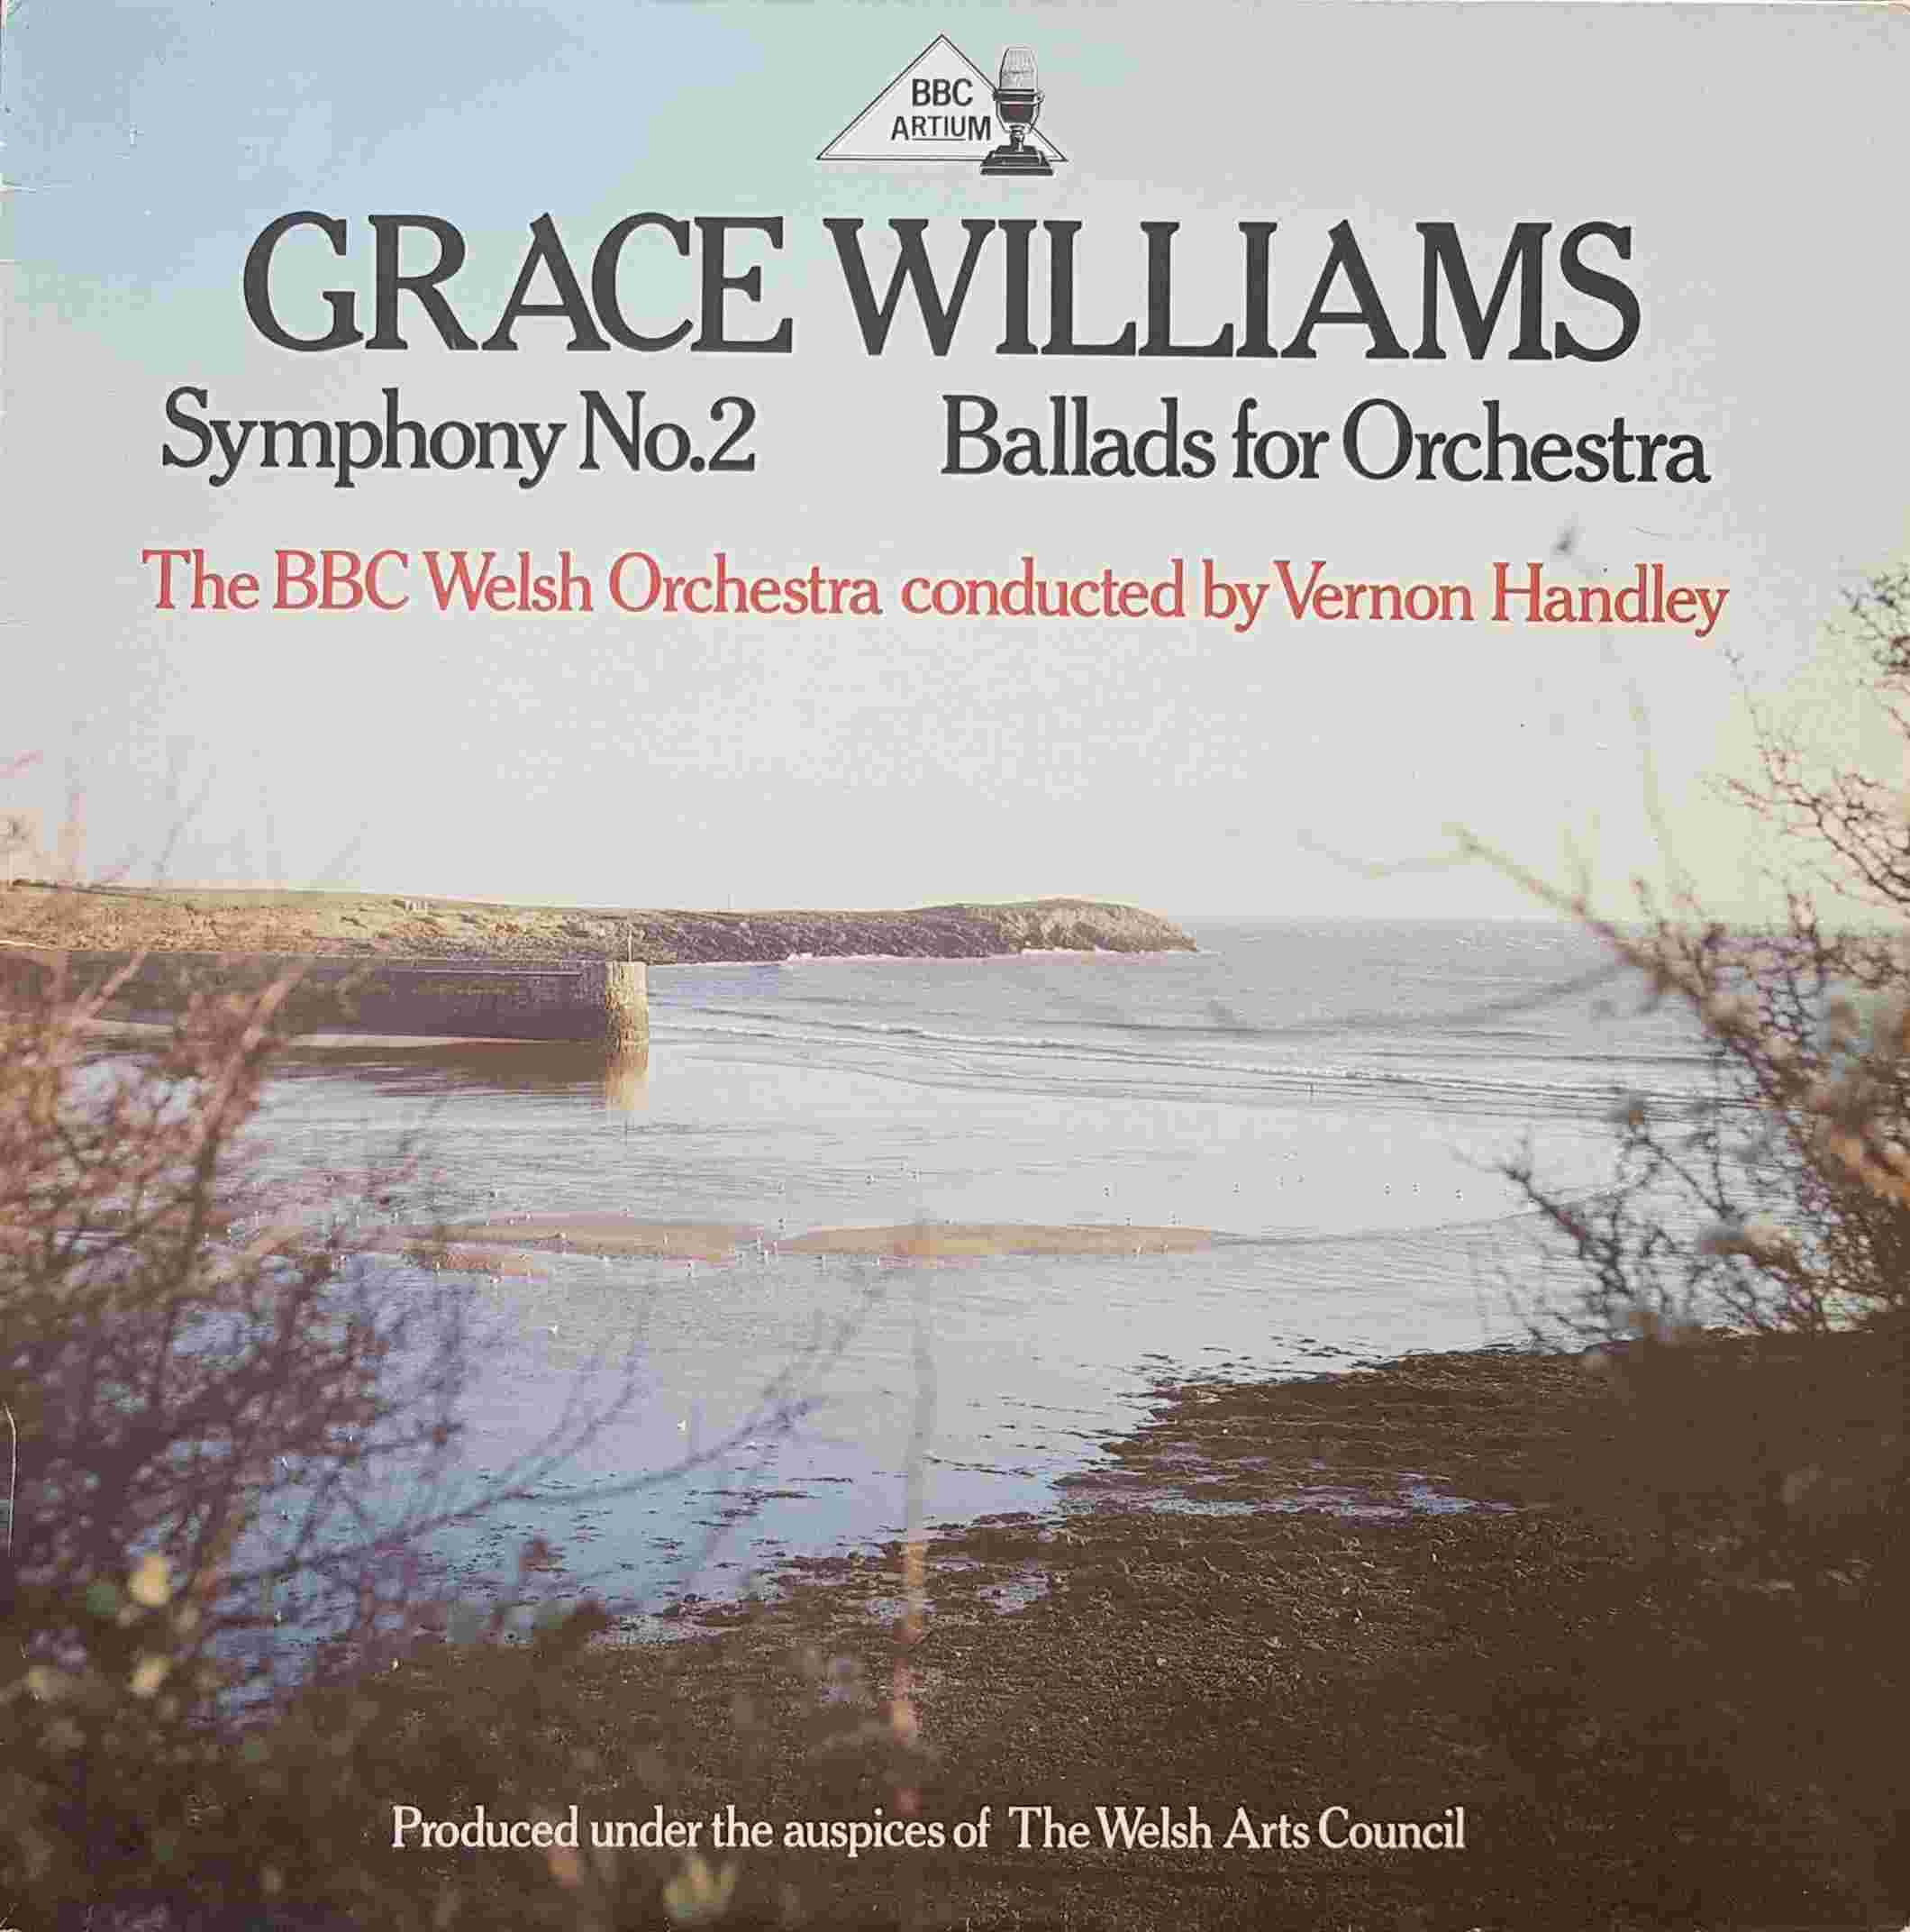 Picture of REGL 381 Grace Williams: Symphony No.2 by artist Grace Williams from the BBC albums - Records and Tapes library